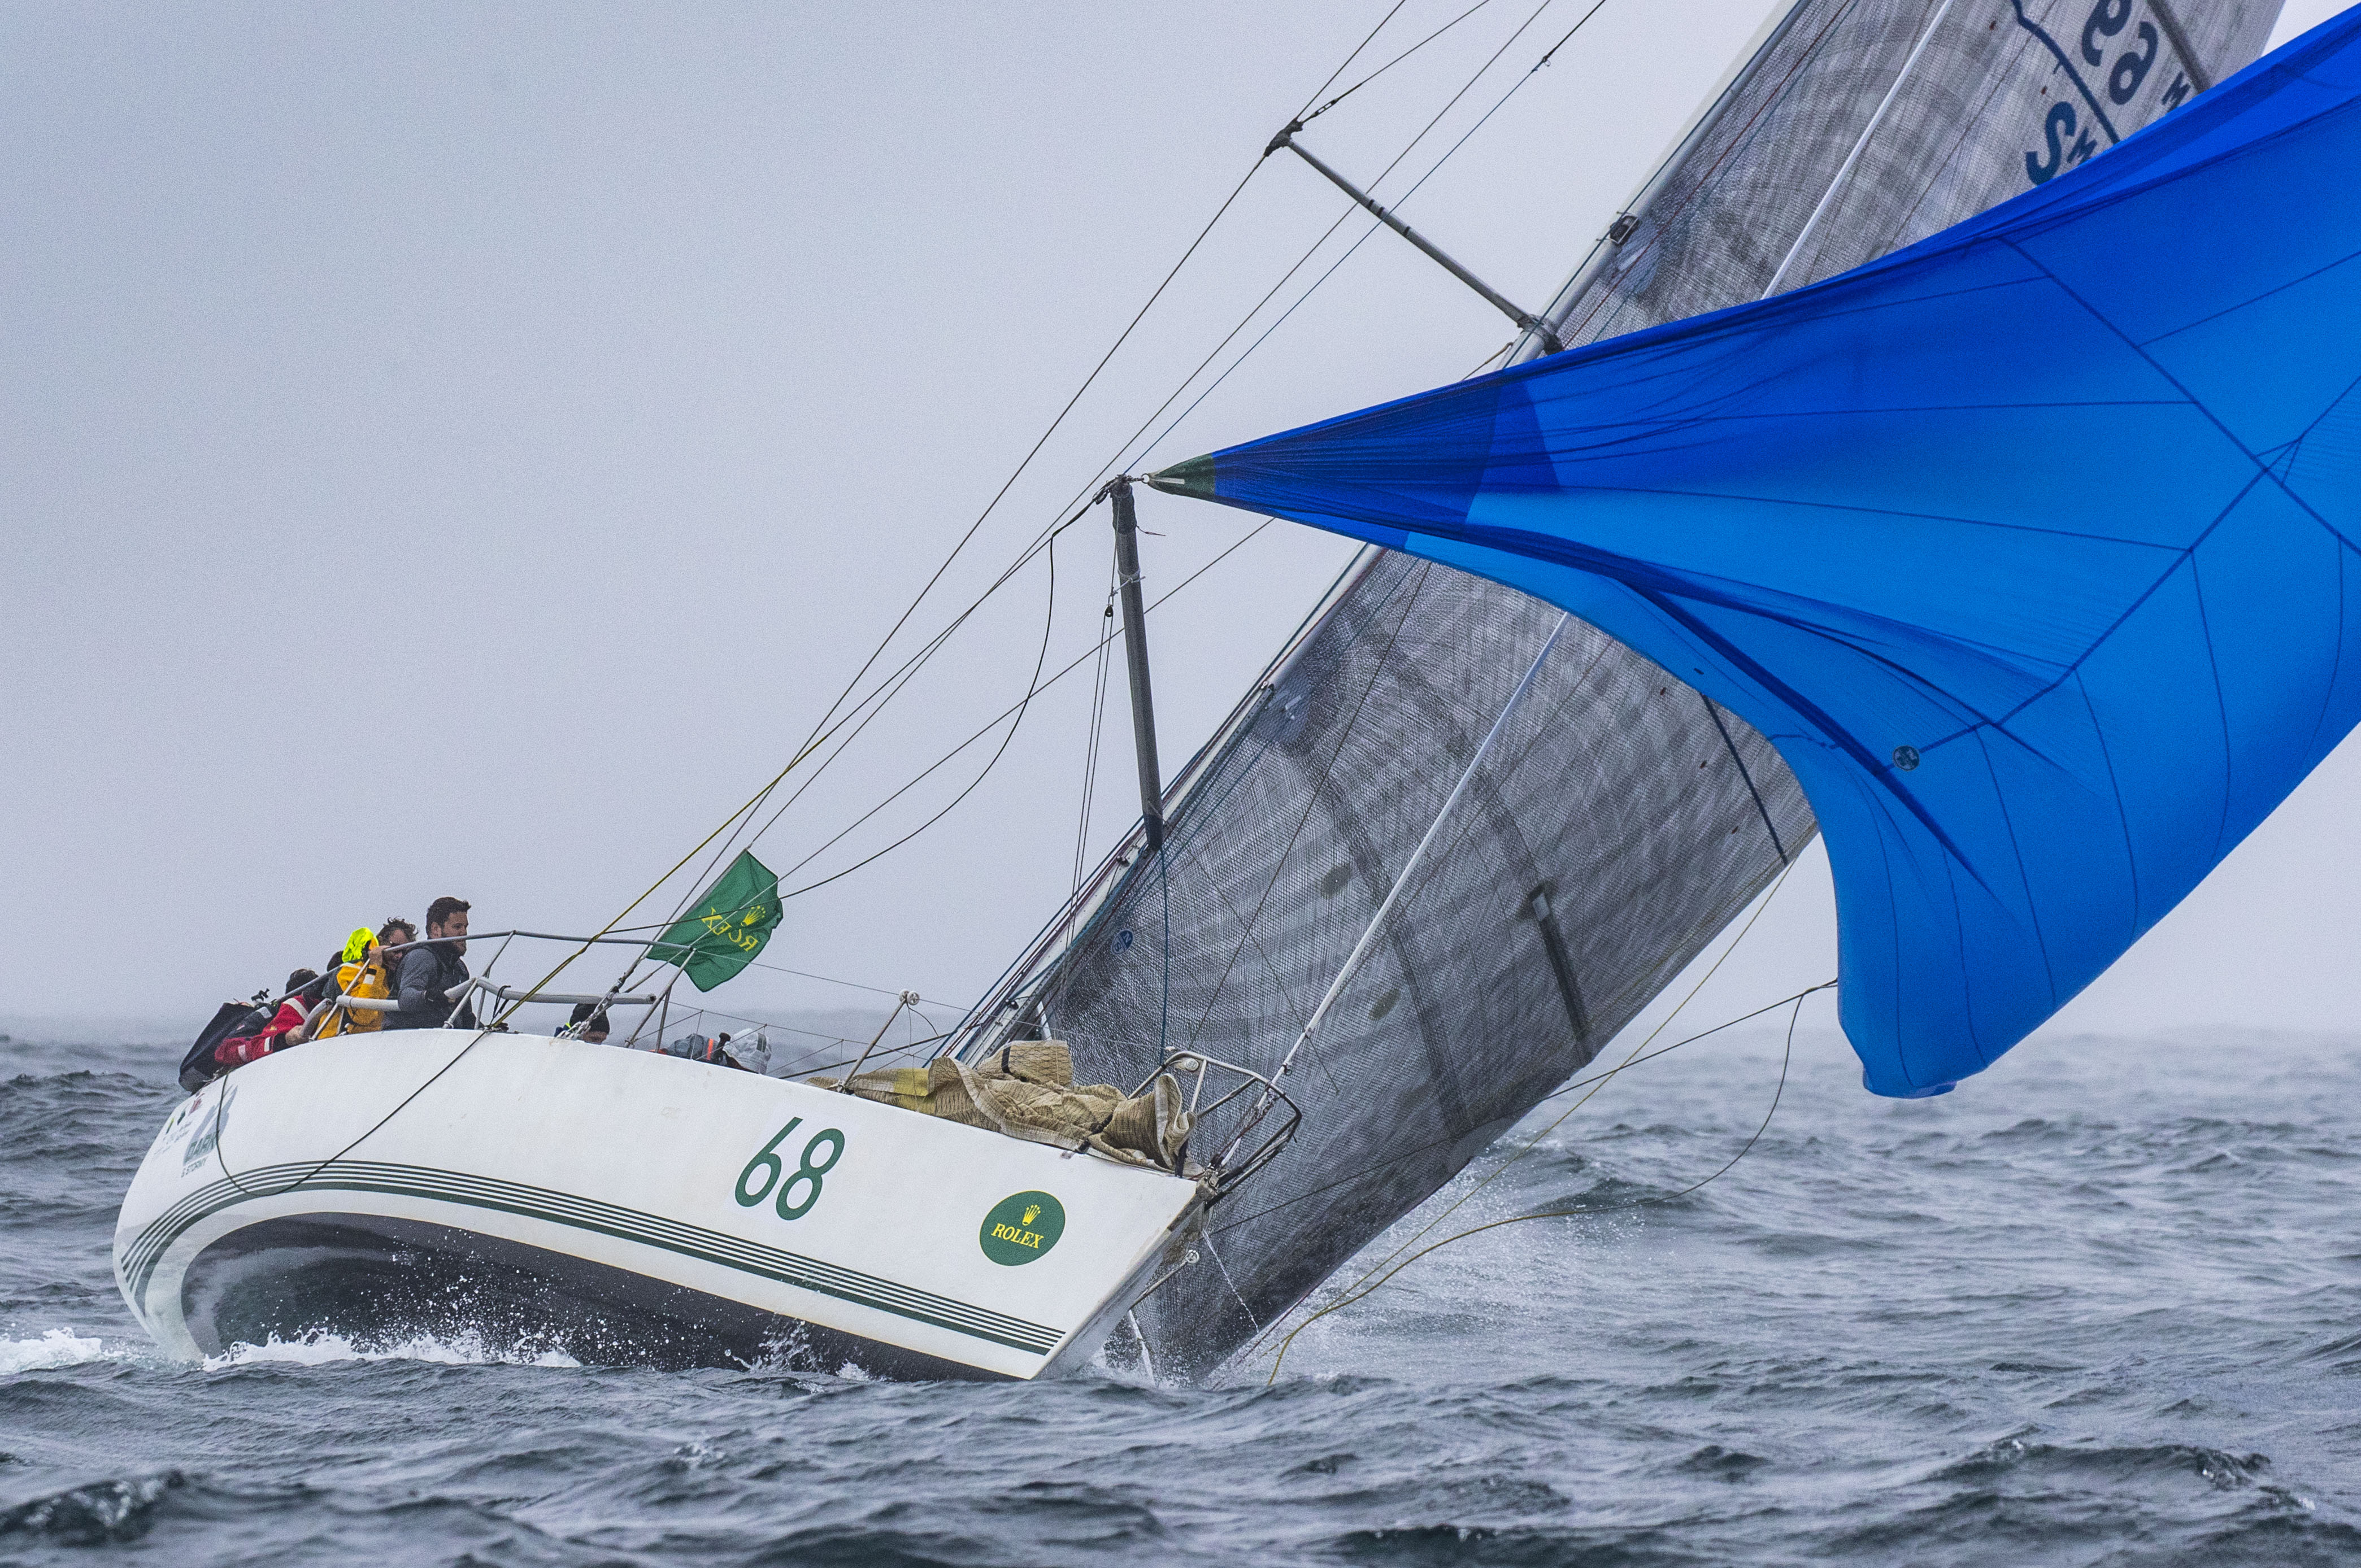 The 37-ft DARK AND STORMY enjoying the conditions during the 2016 Rolex Sydney Hobart